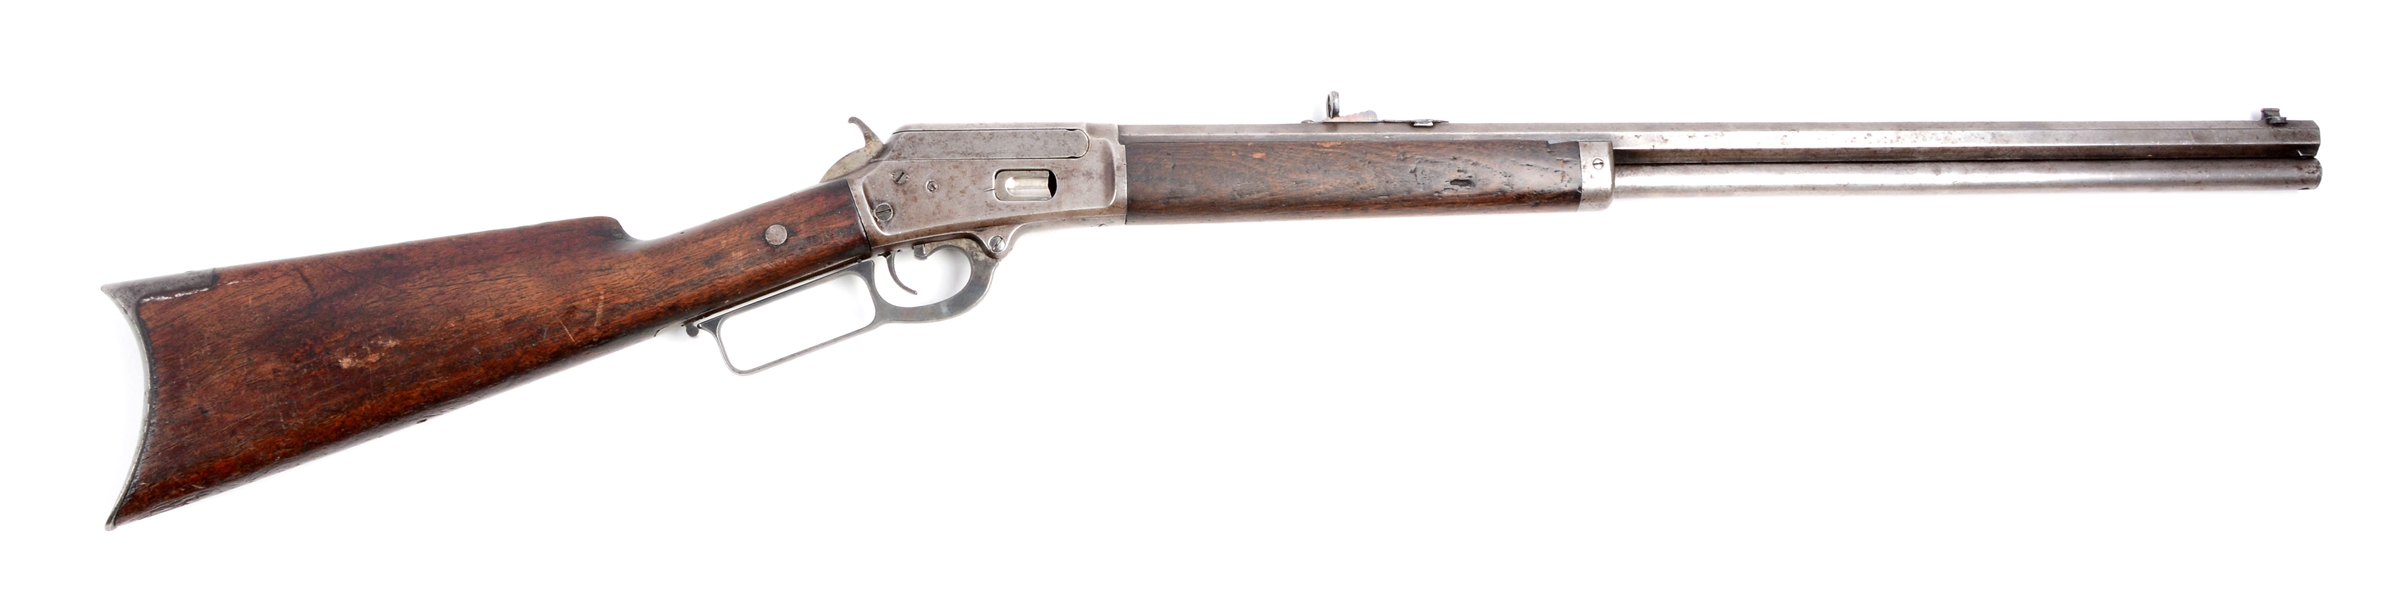 (A^) MARLIN MODEL 1889 LEVER ACTION RIFLE.